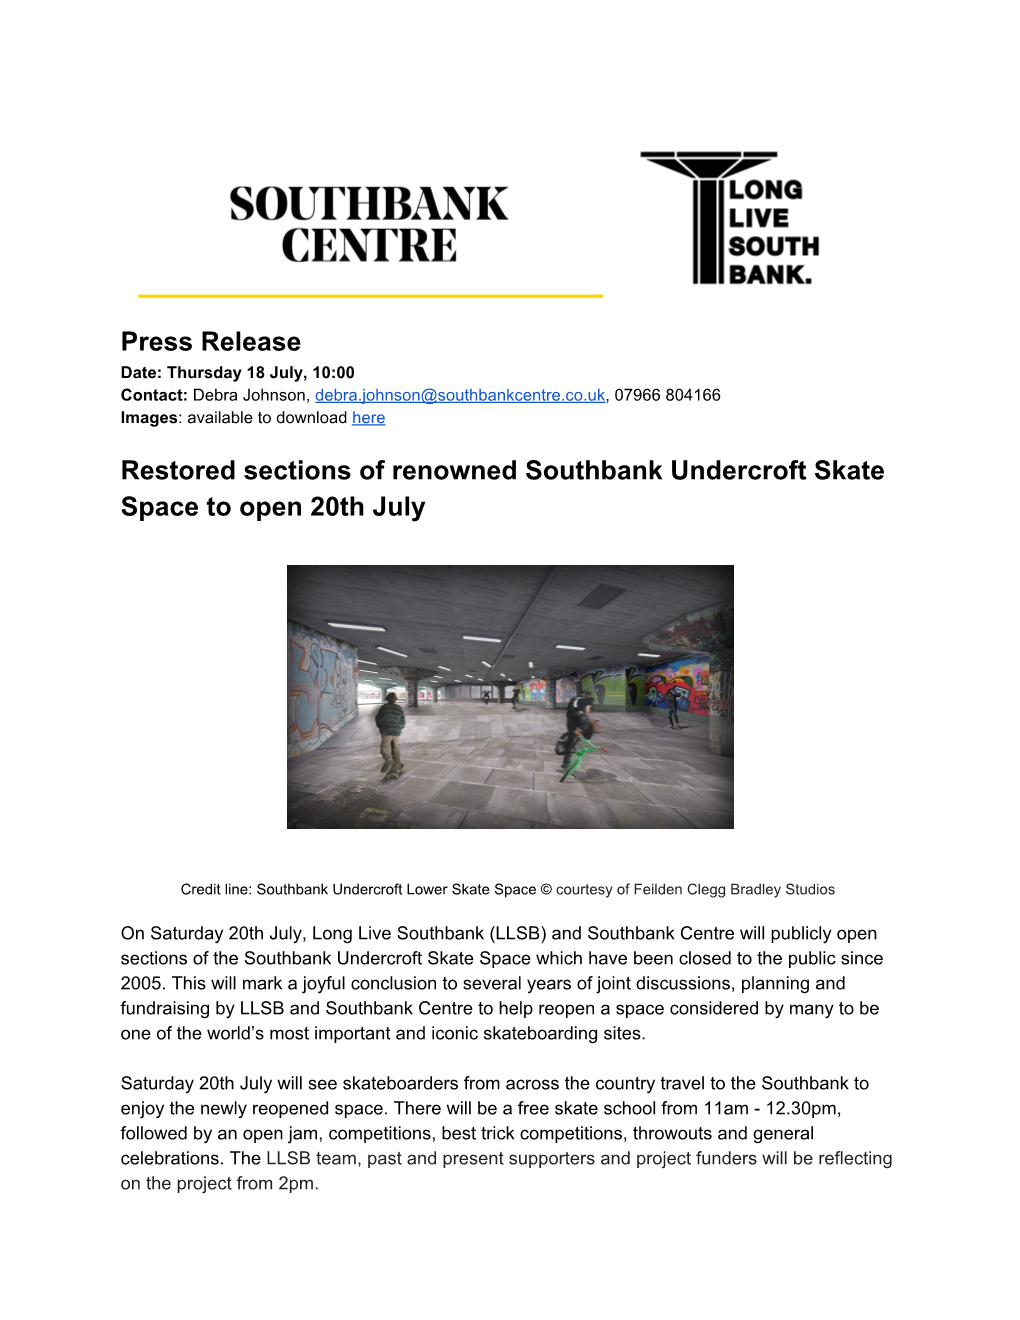 Press Release Restored Sections of Renowned Southbank Undercroft Skate Space to Open 20Th July